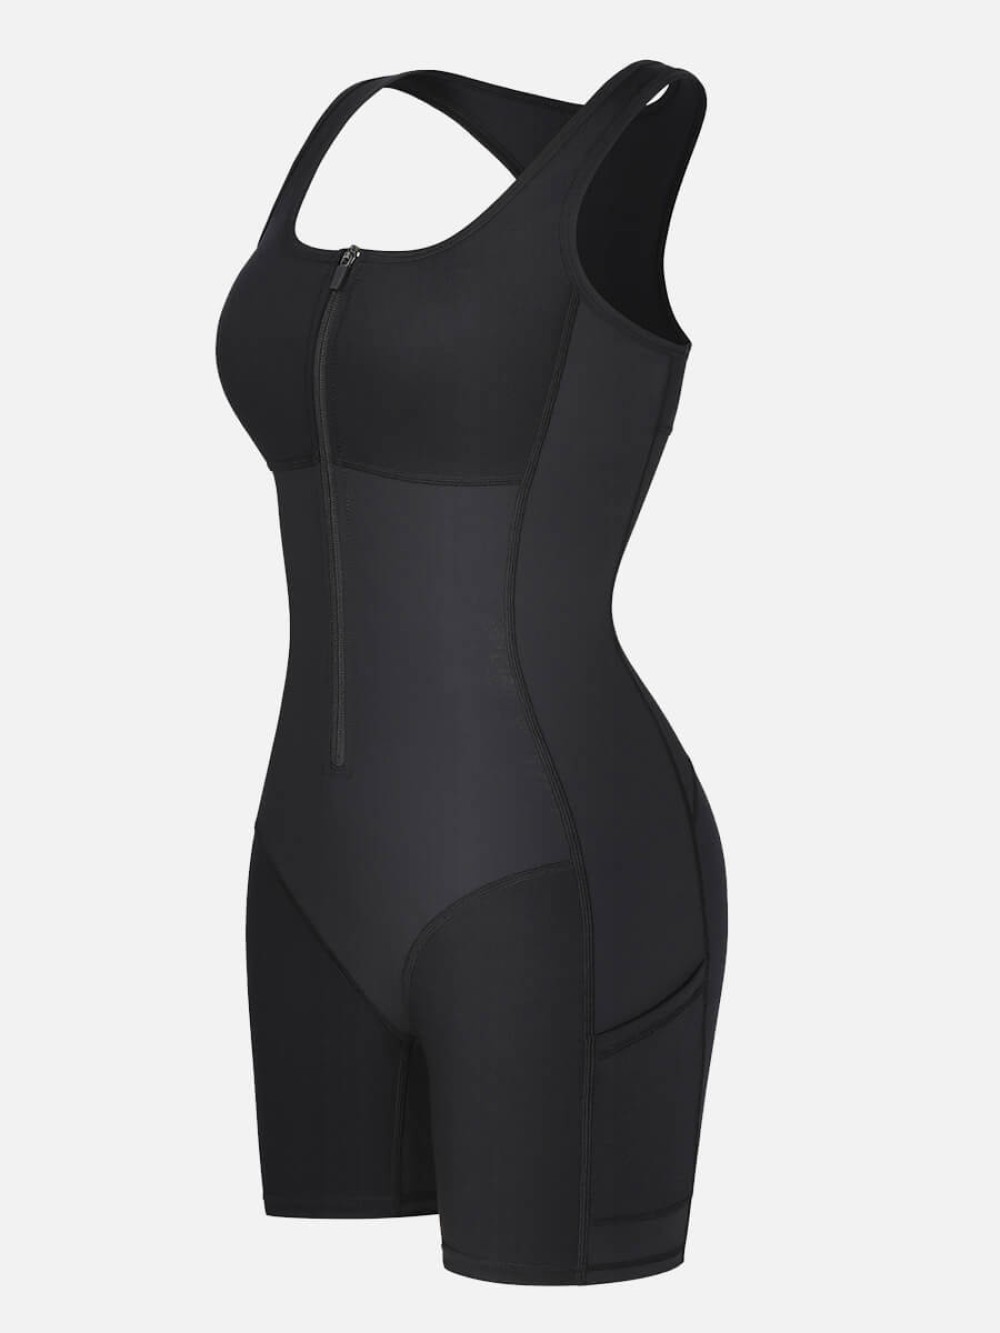 Built-in Removable Bra Pads Body Shaper With Pockets